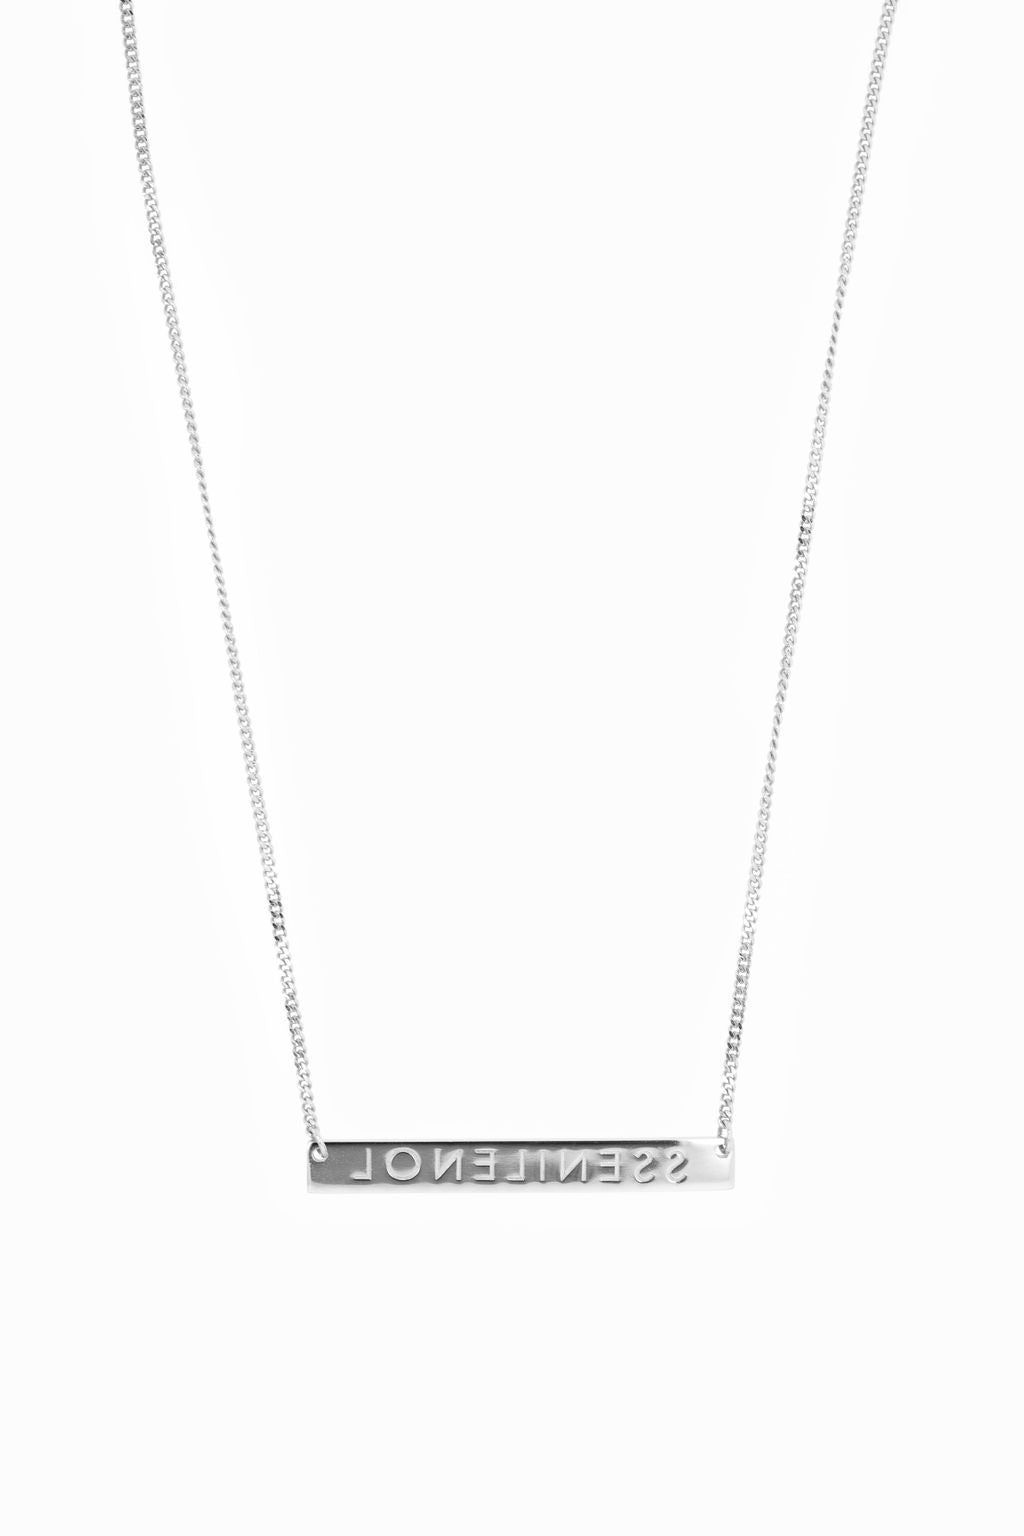 Loneliness Necklace